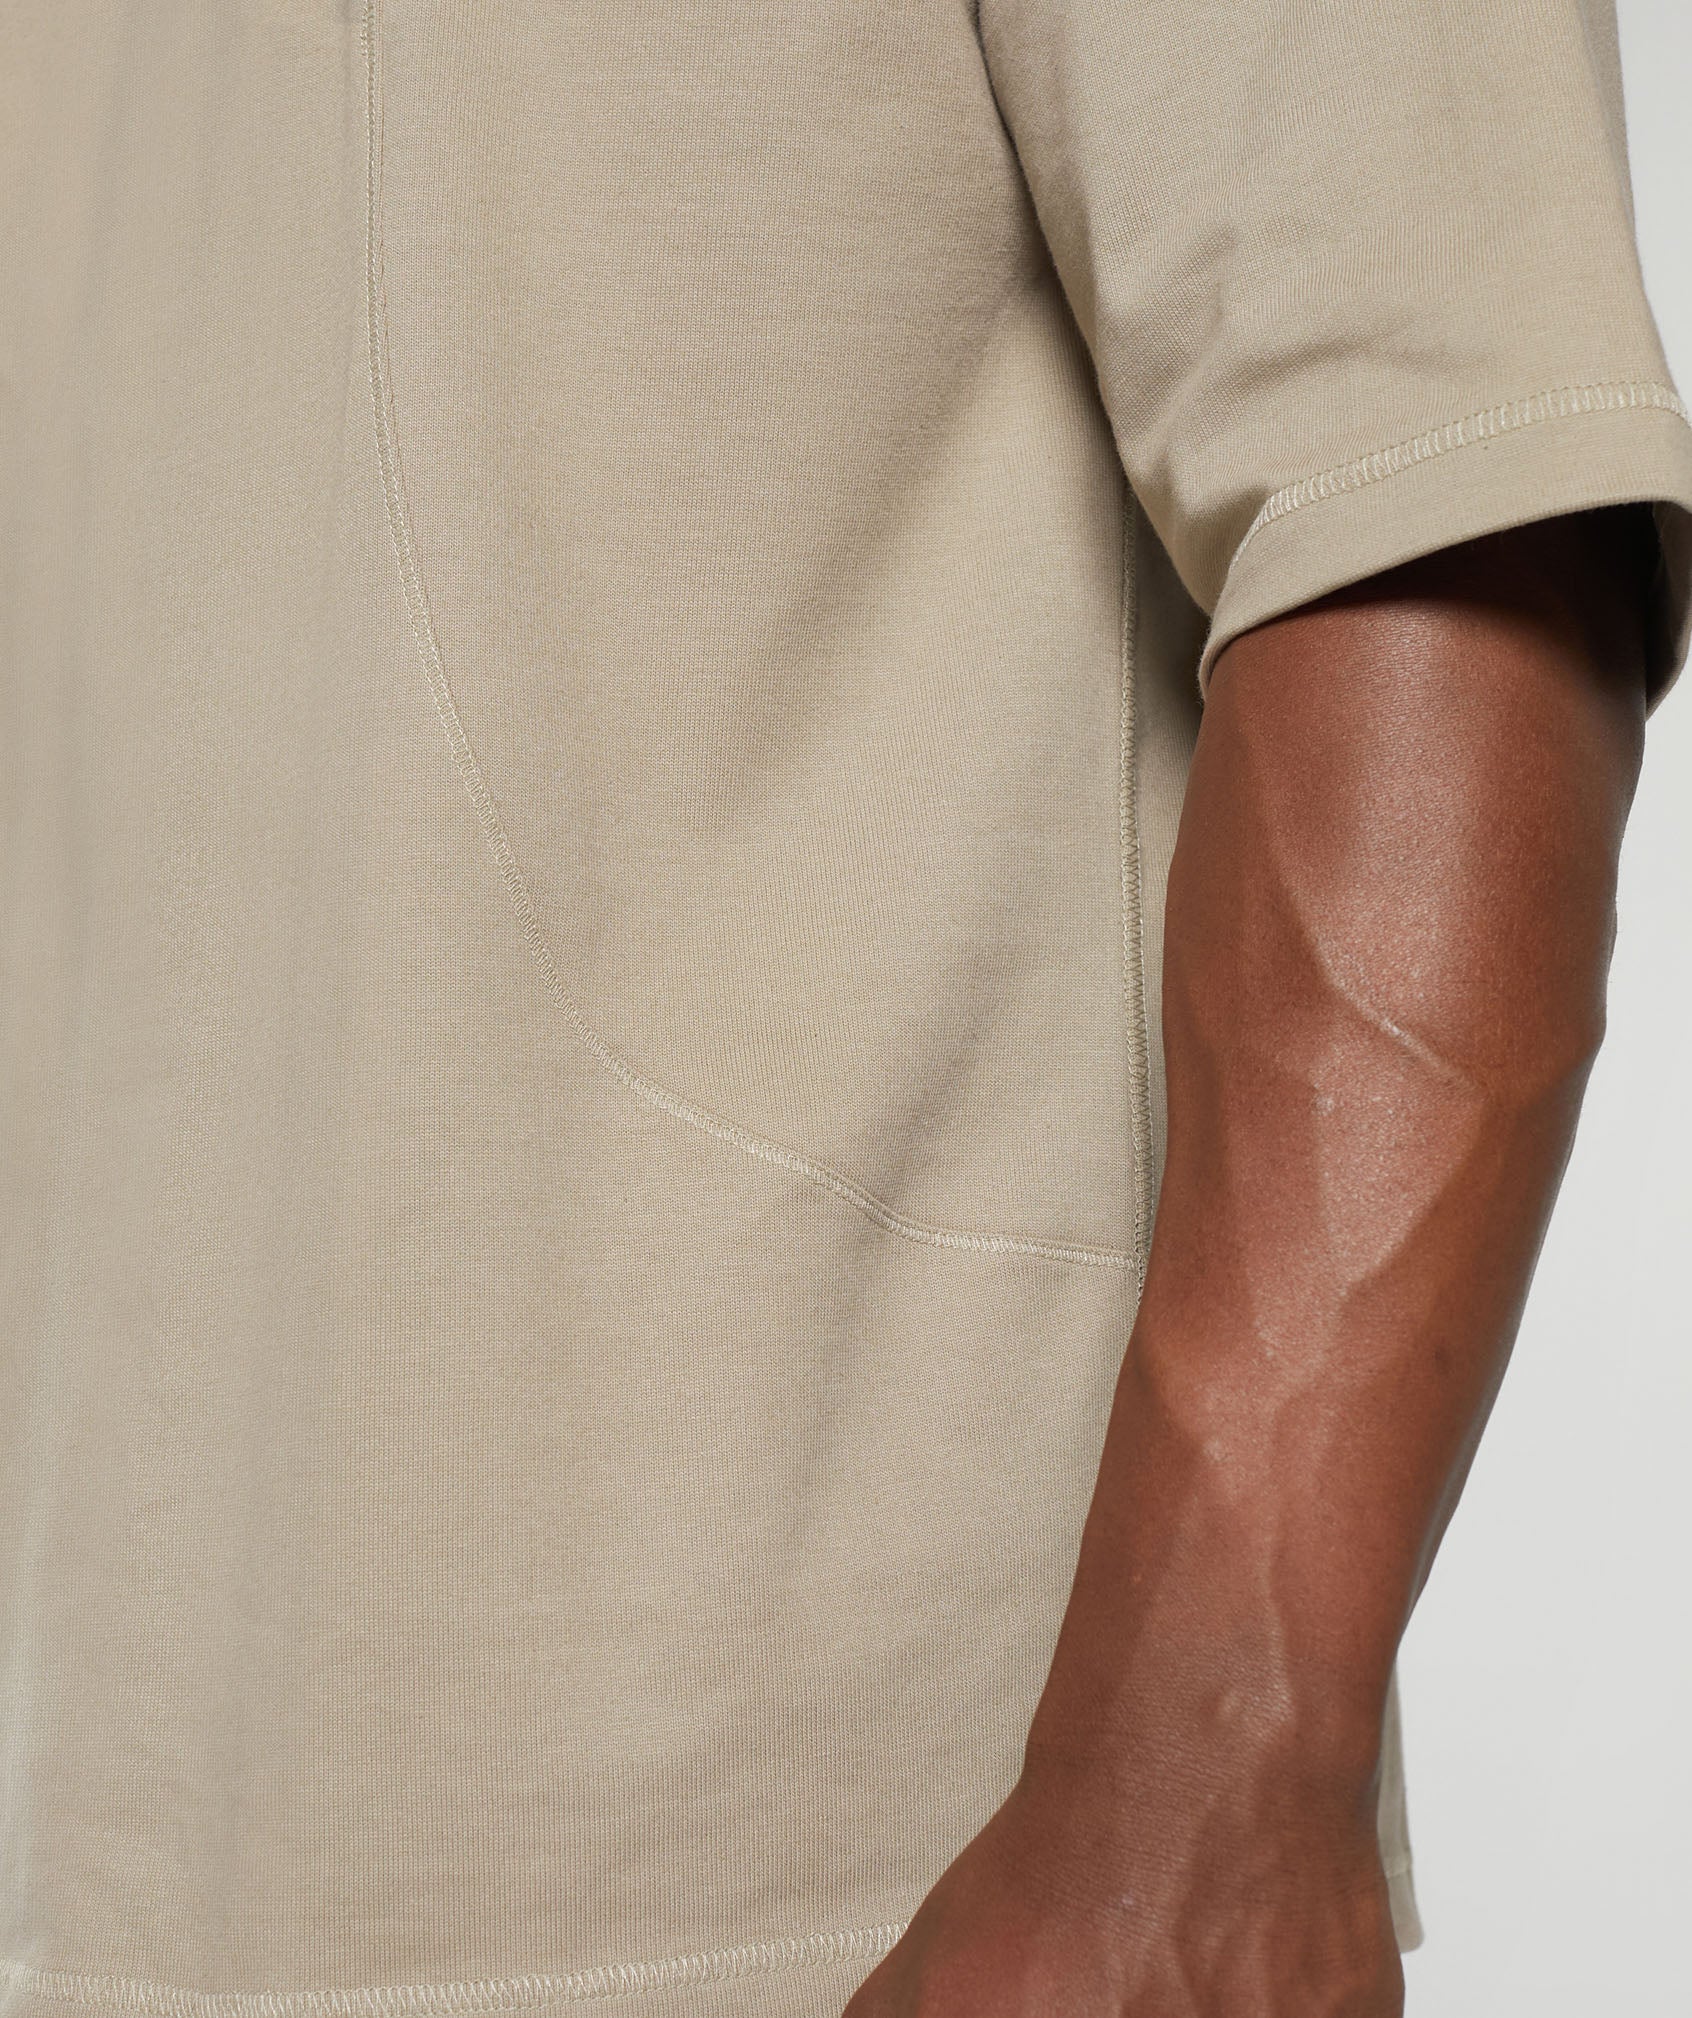 Premium Lifting T-Shirt in Sand Brown - view 6